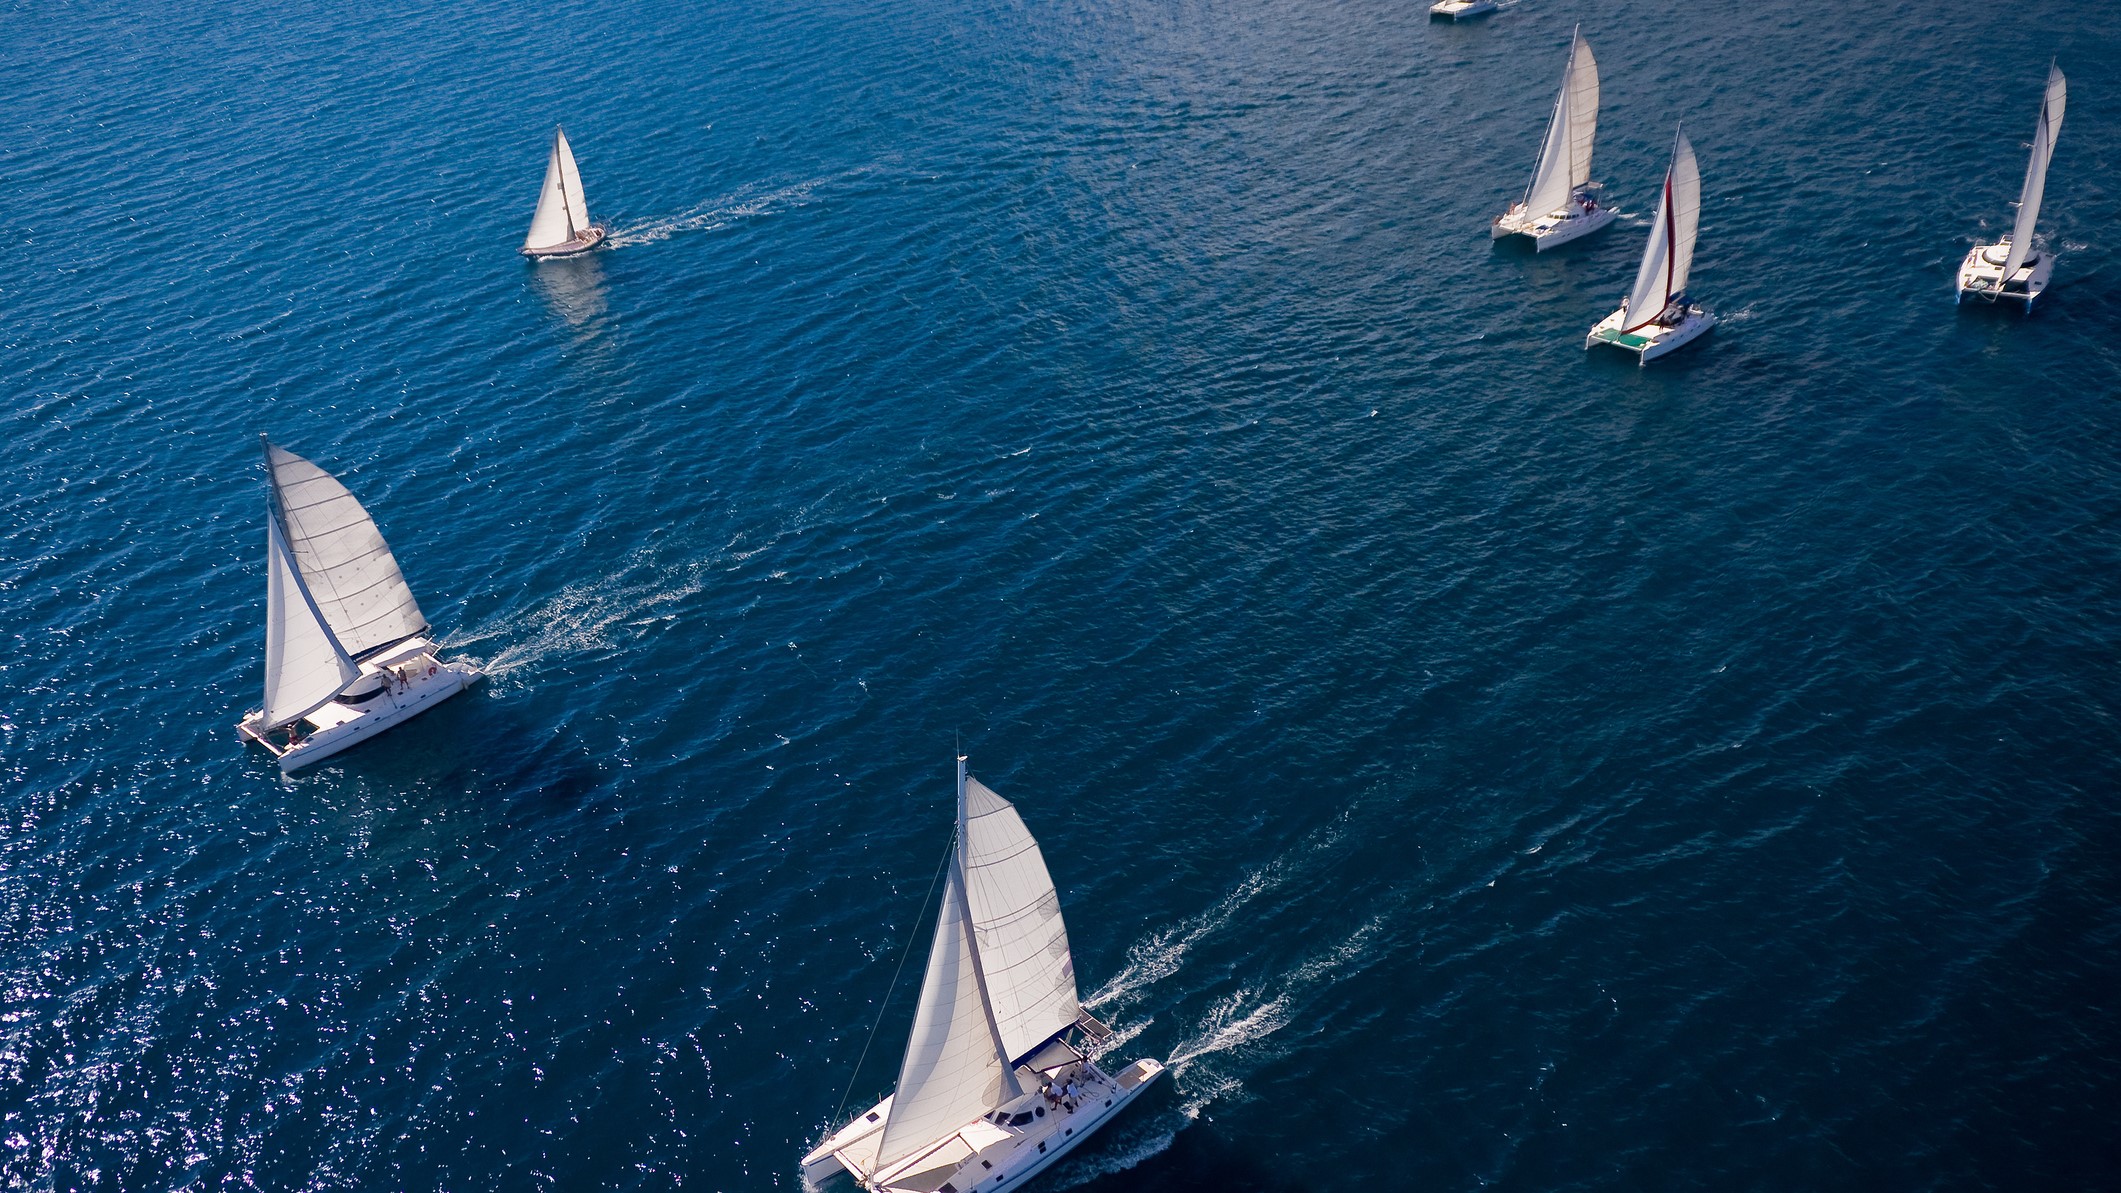 Photo of five sailboats setting out in the same direction over dark blue water